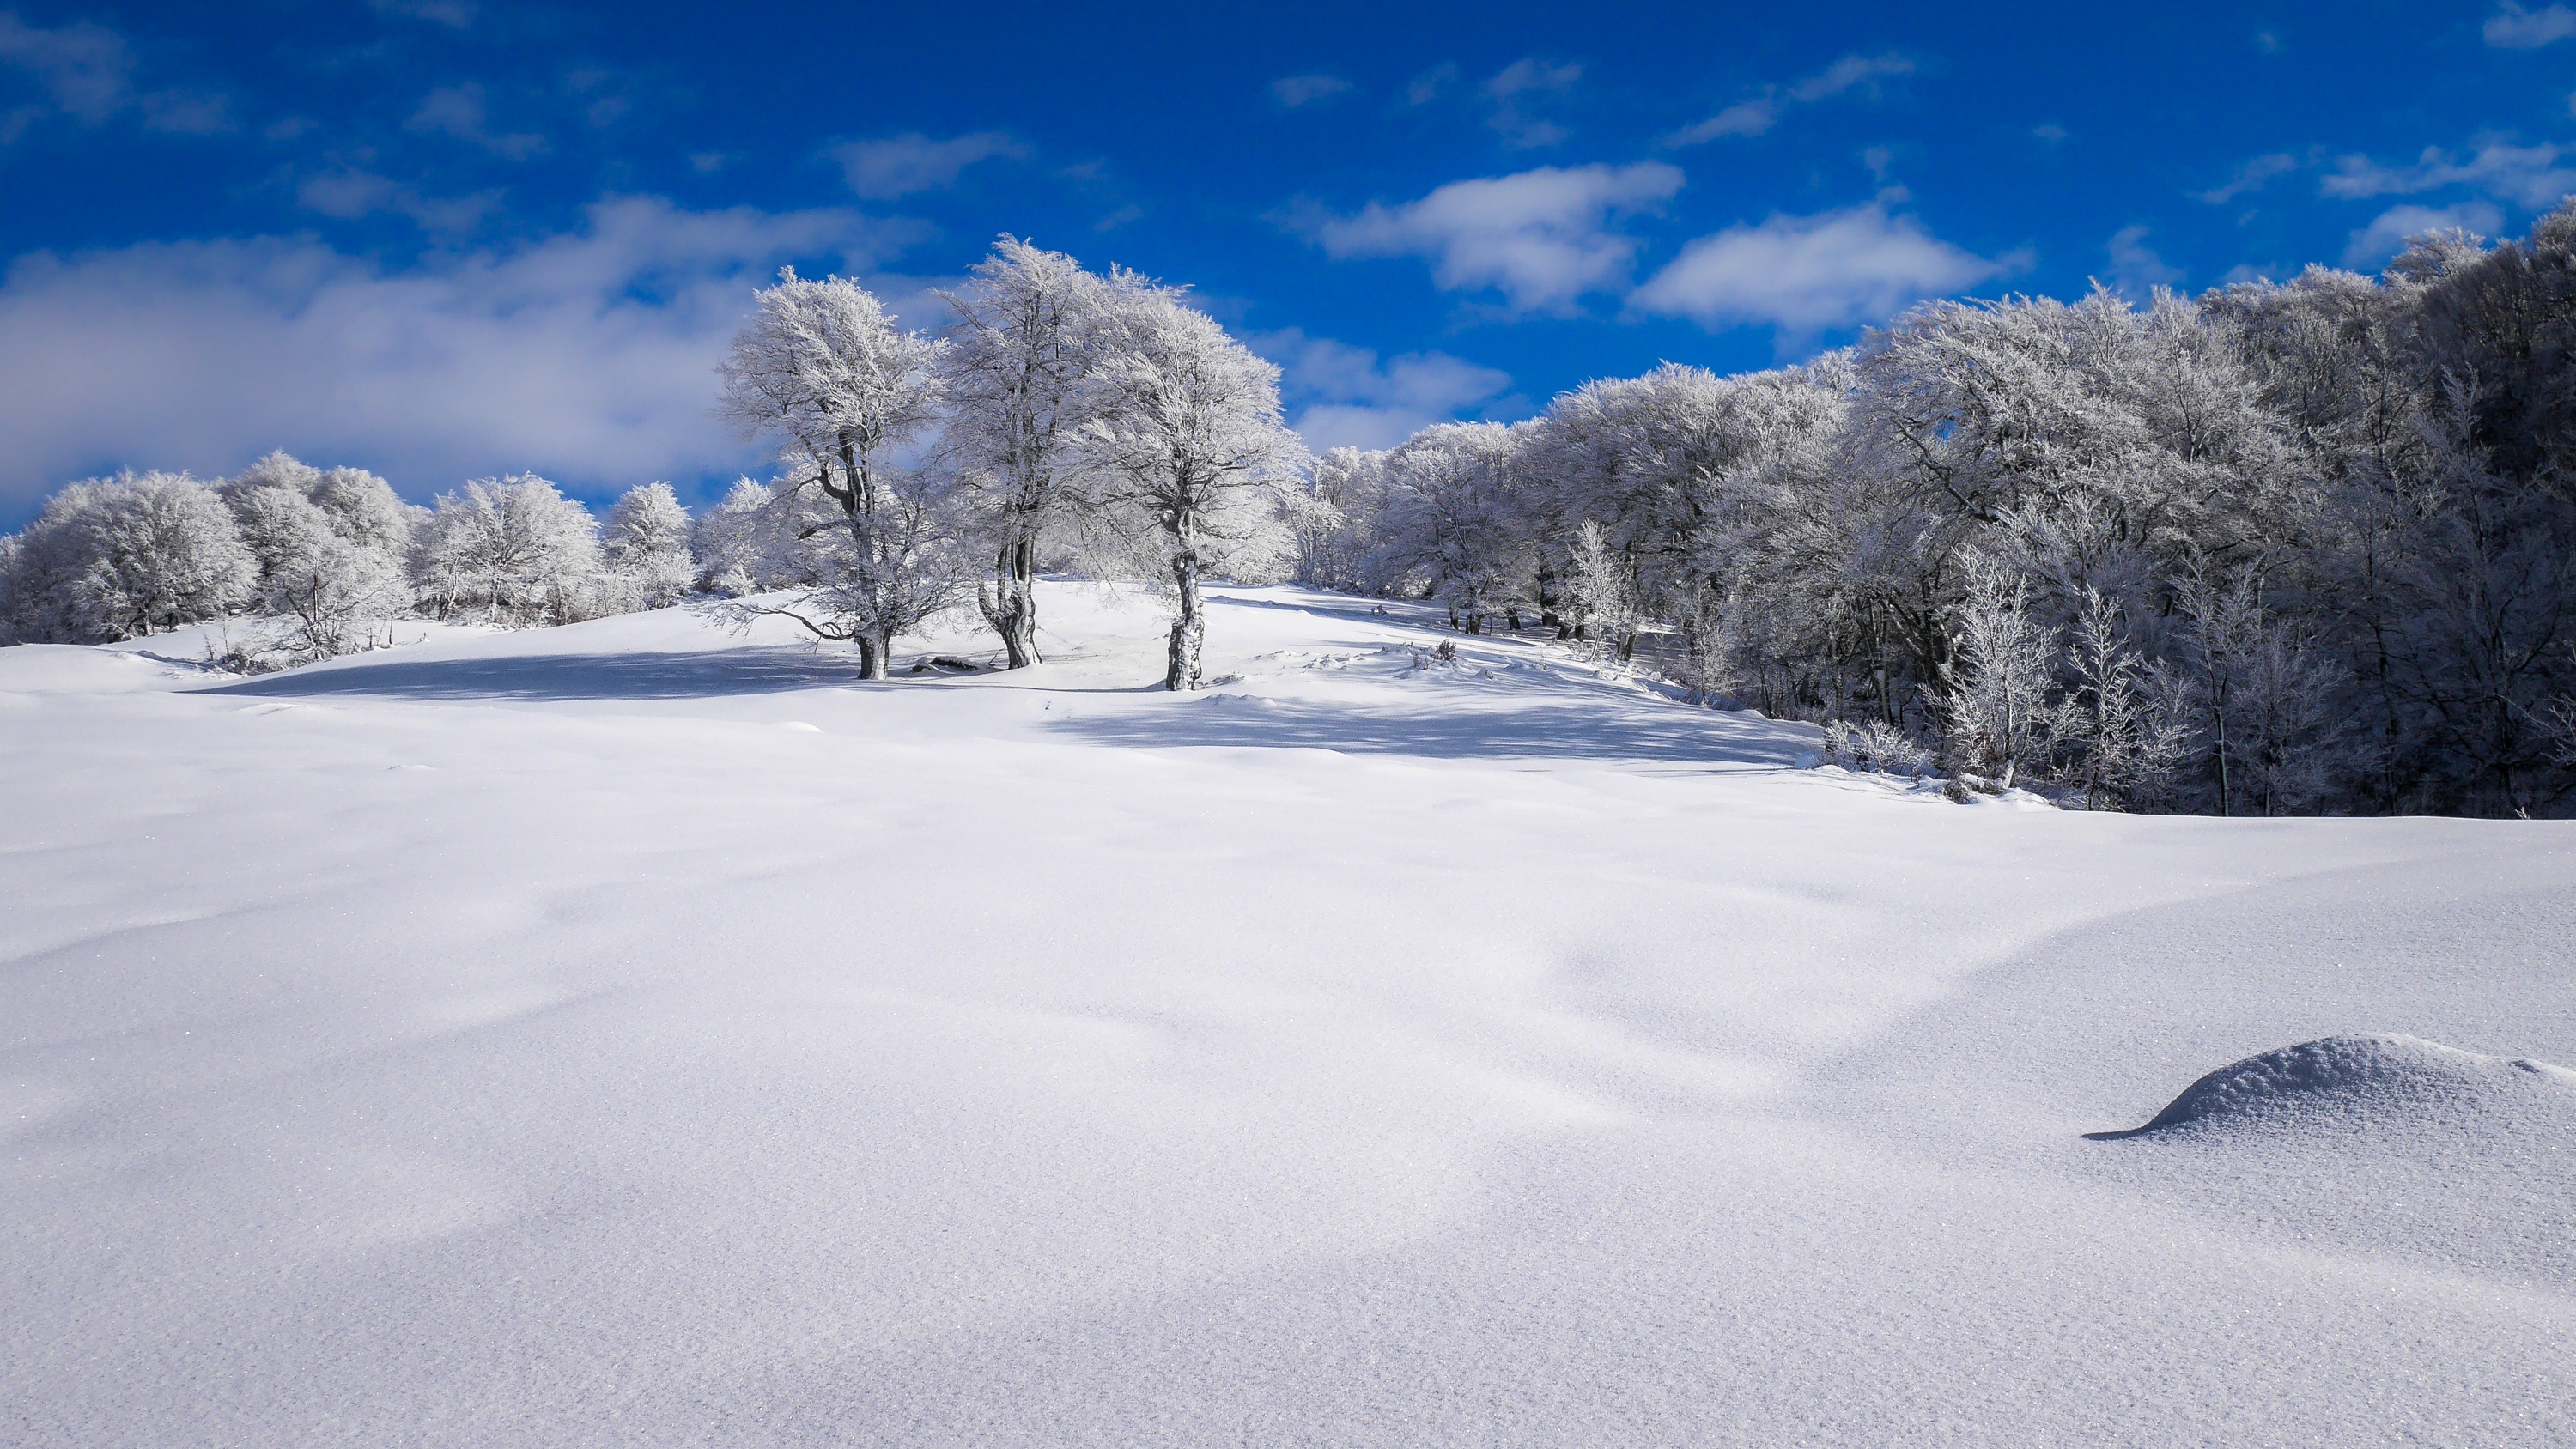 General 3000x1688 snow winter clear sky trees